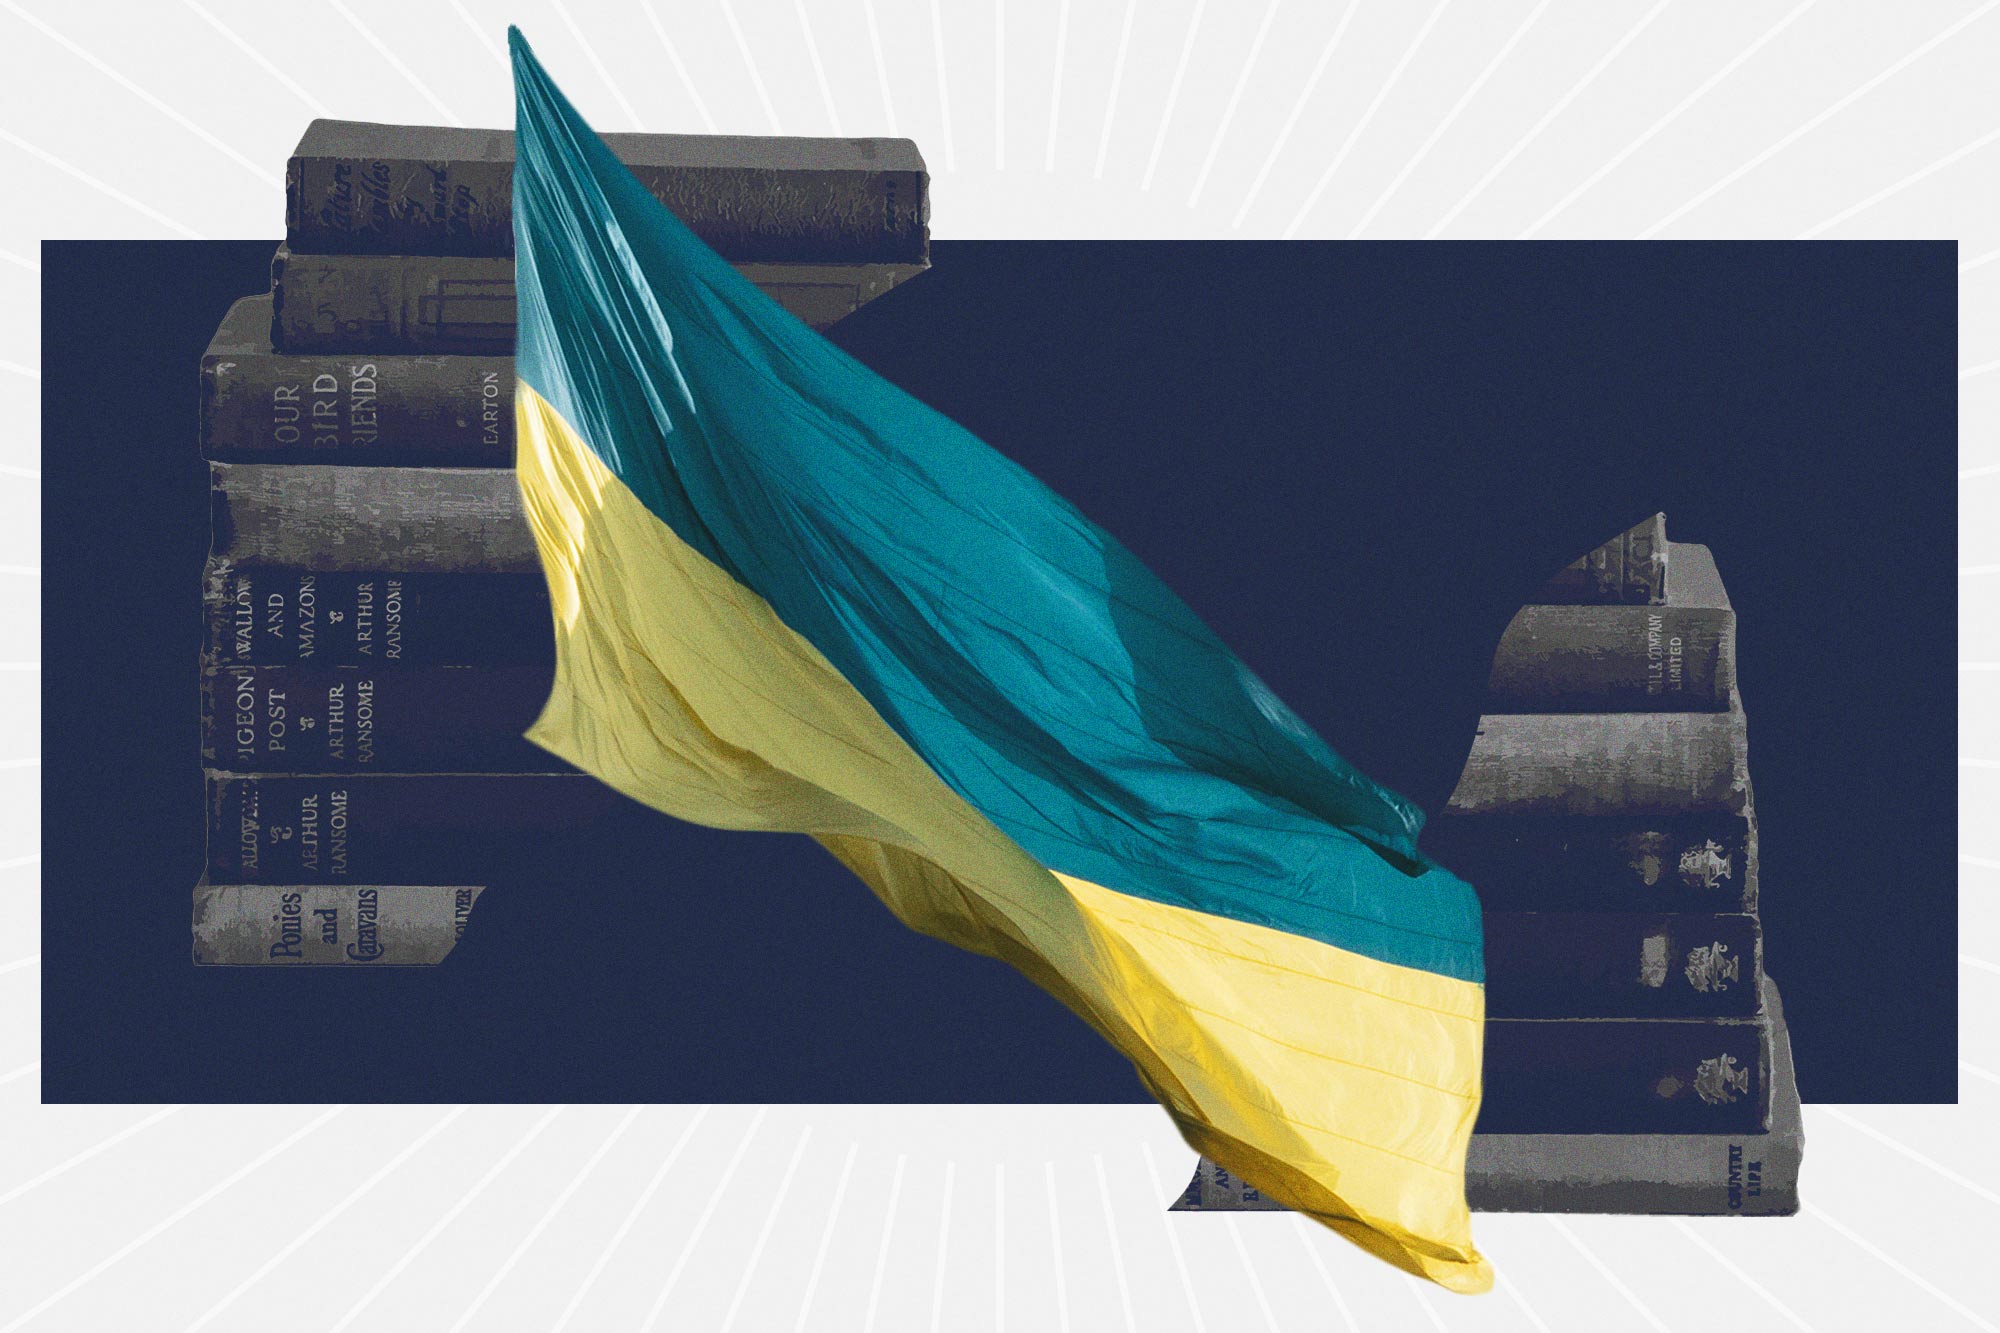 Ukraine Flag in front of a stack of books on a table